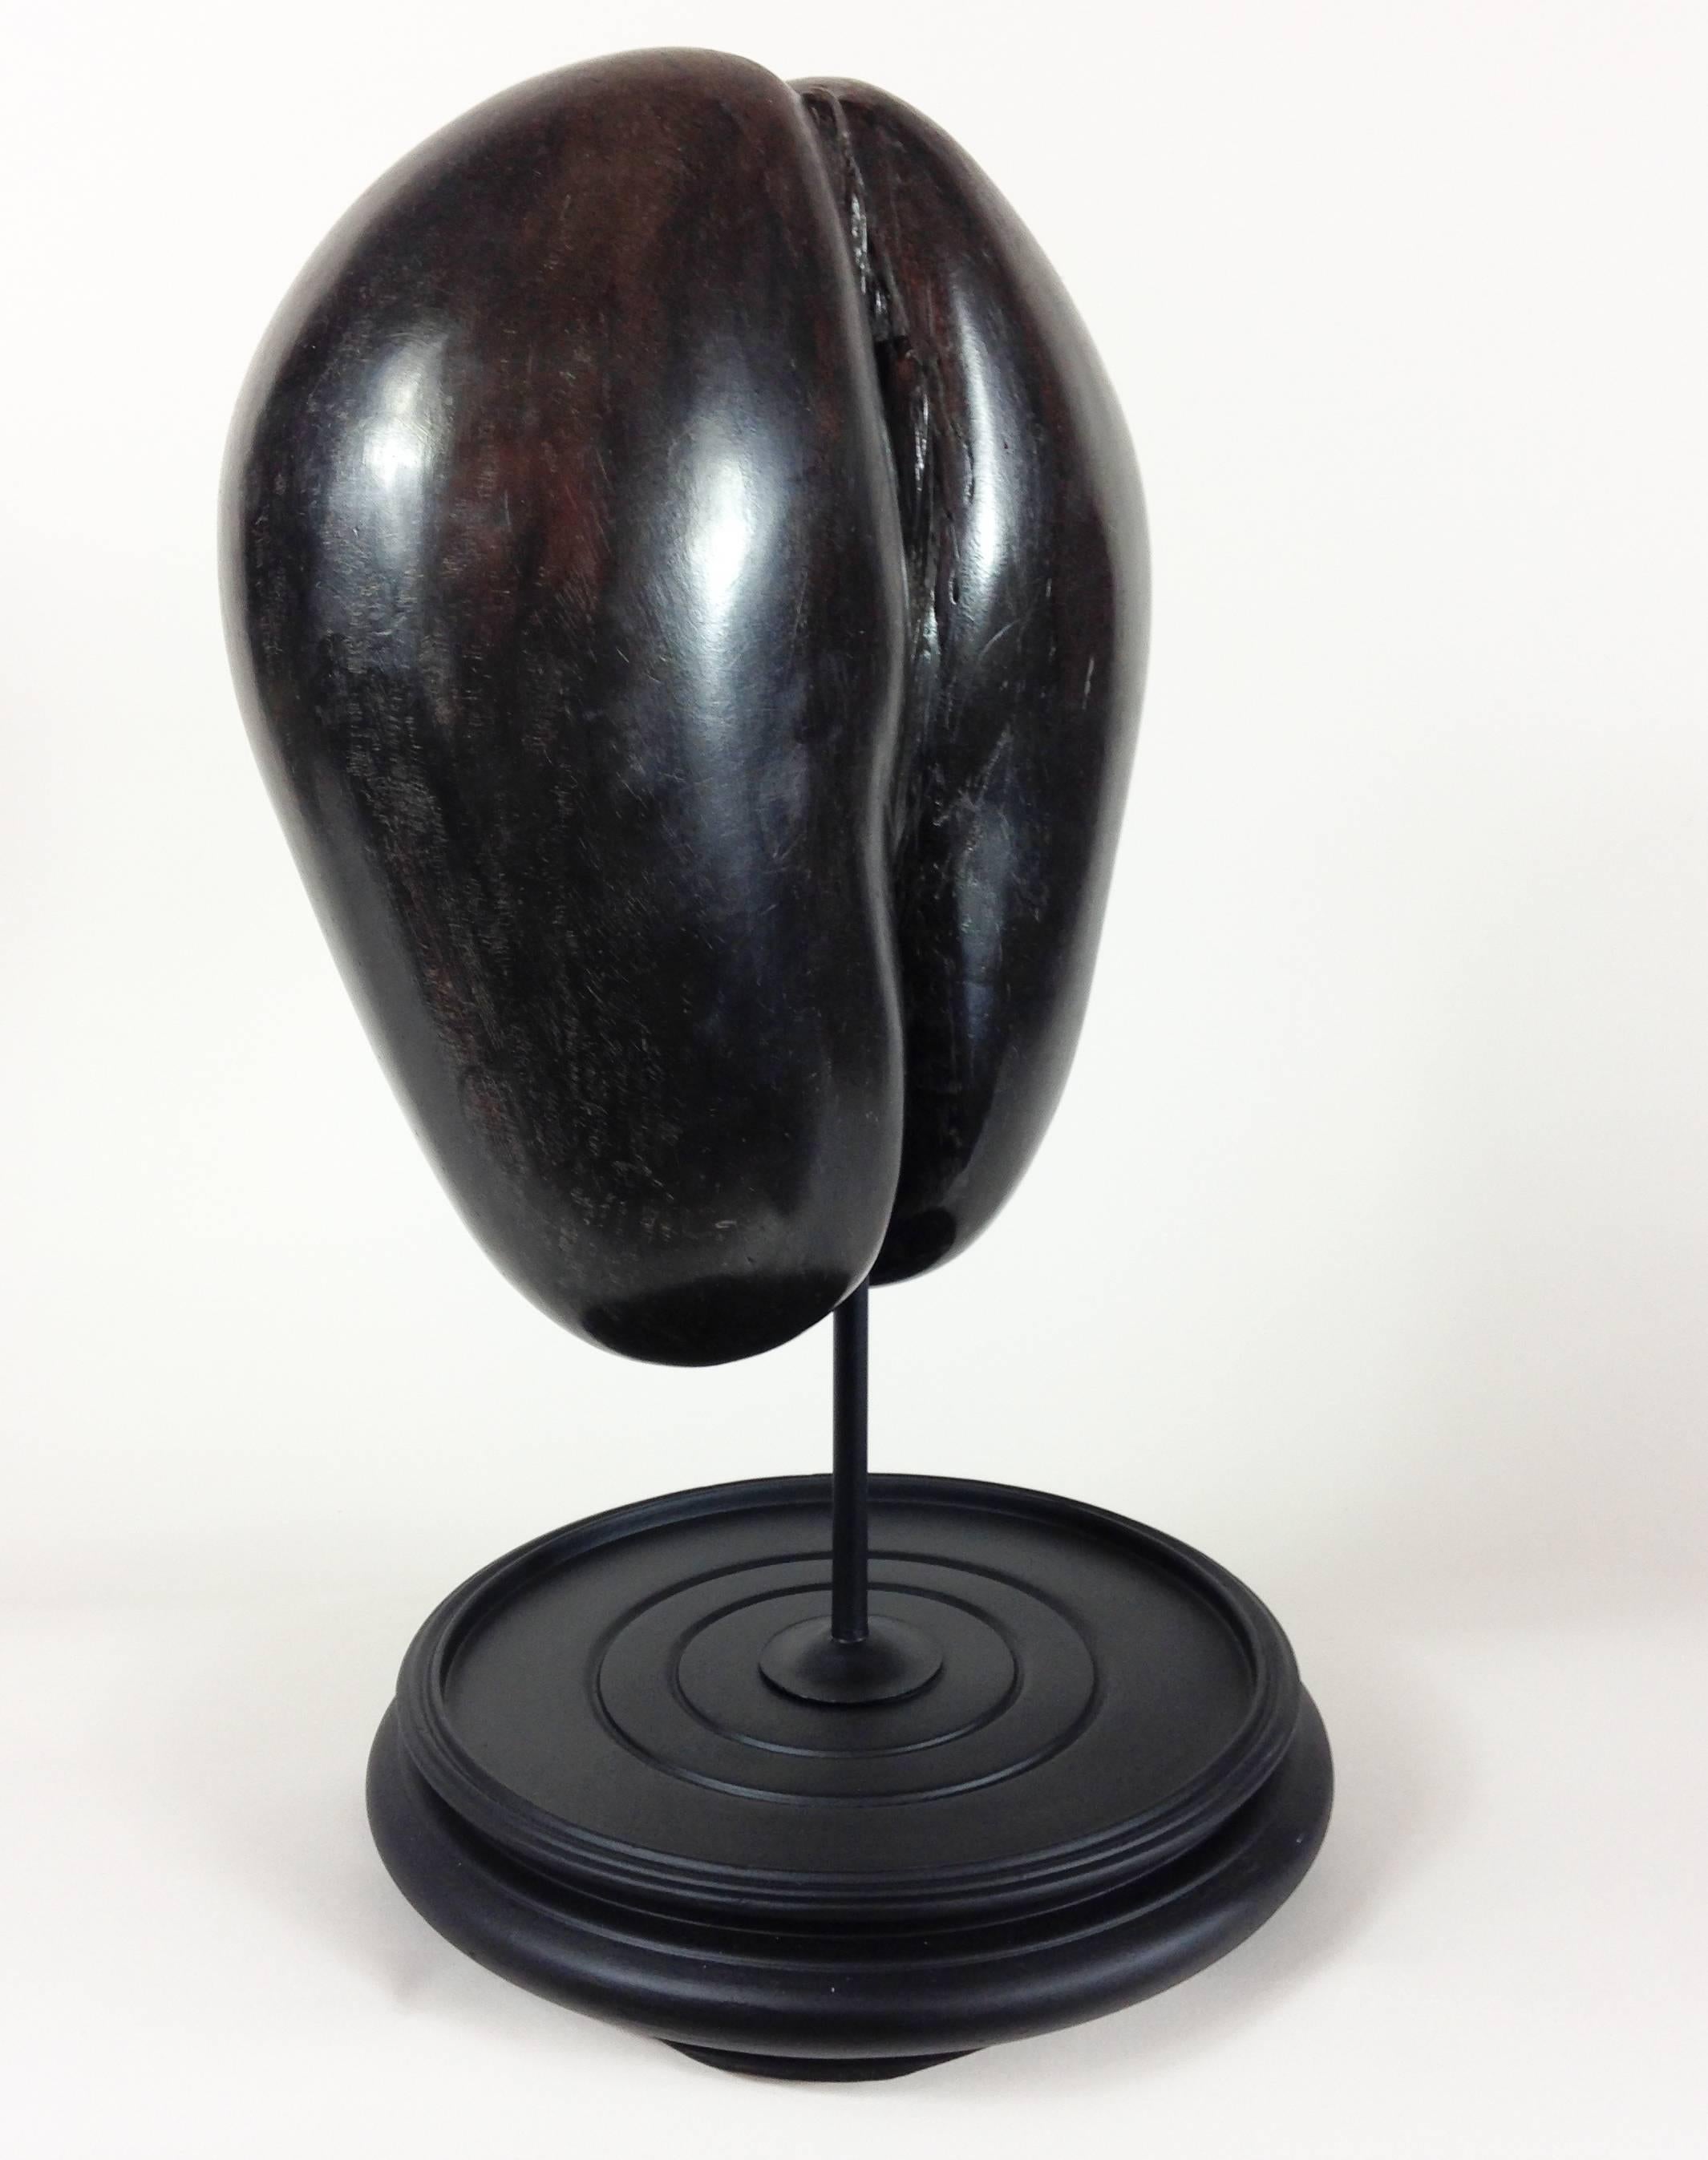 A very fine example of a Coco de Mer (Lodoicea maldivica).

A wonderful, dark coloration with a deep lustre. In a complete, undamaged state with its contents still present.

Sizes stated exclude the stand.